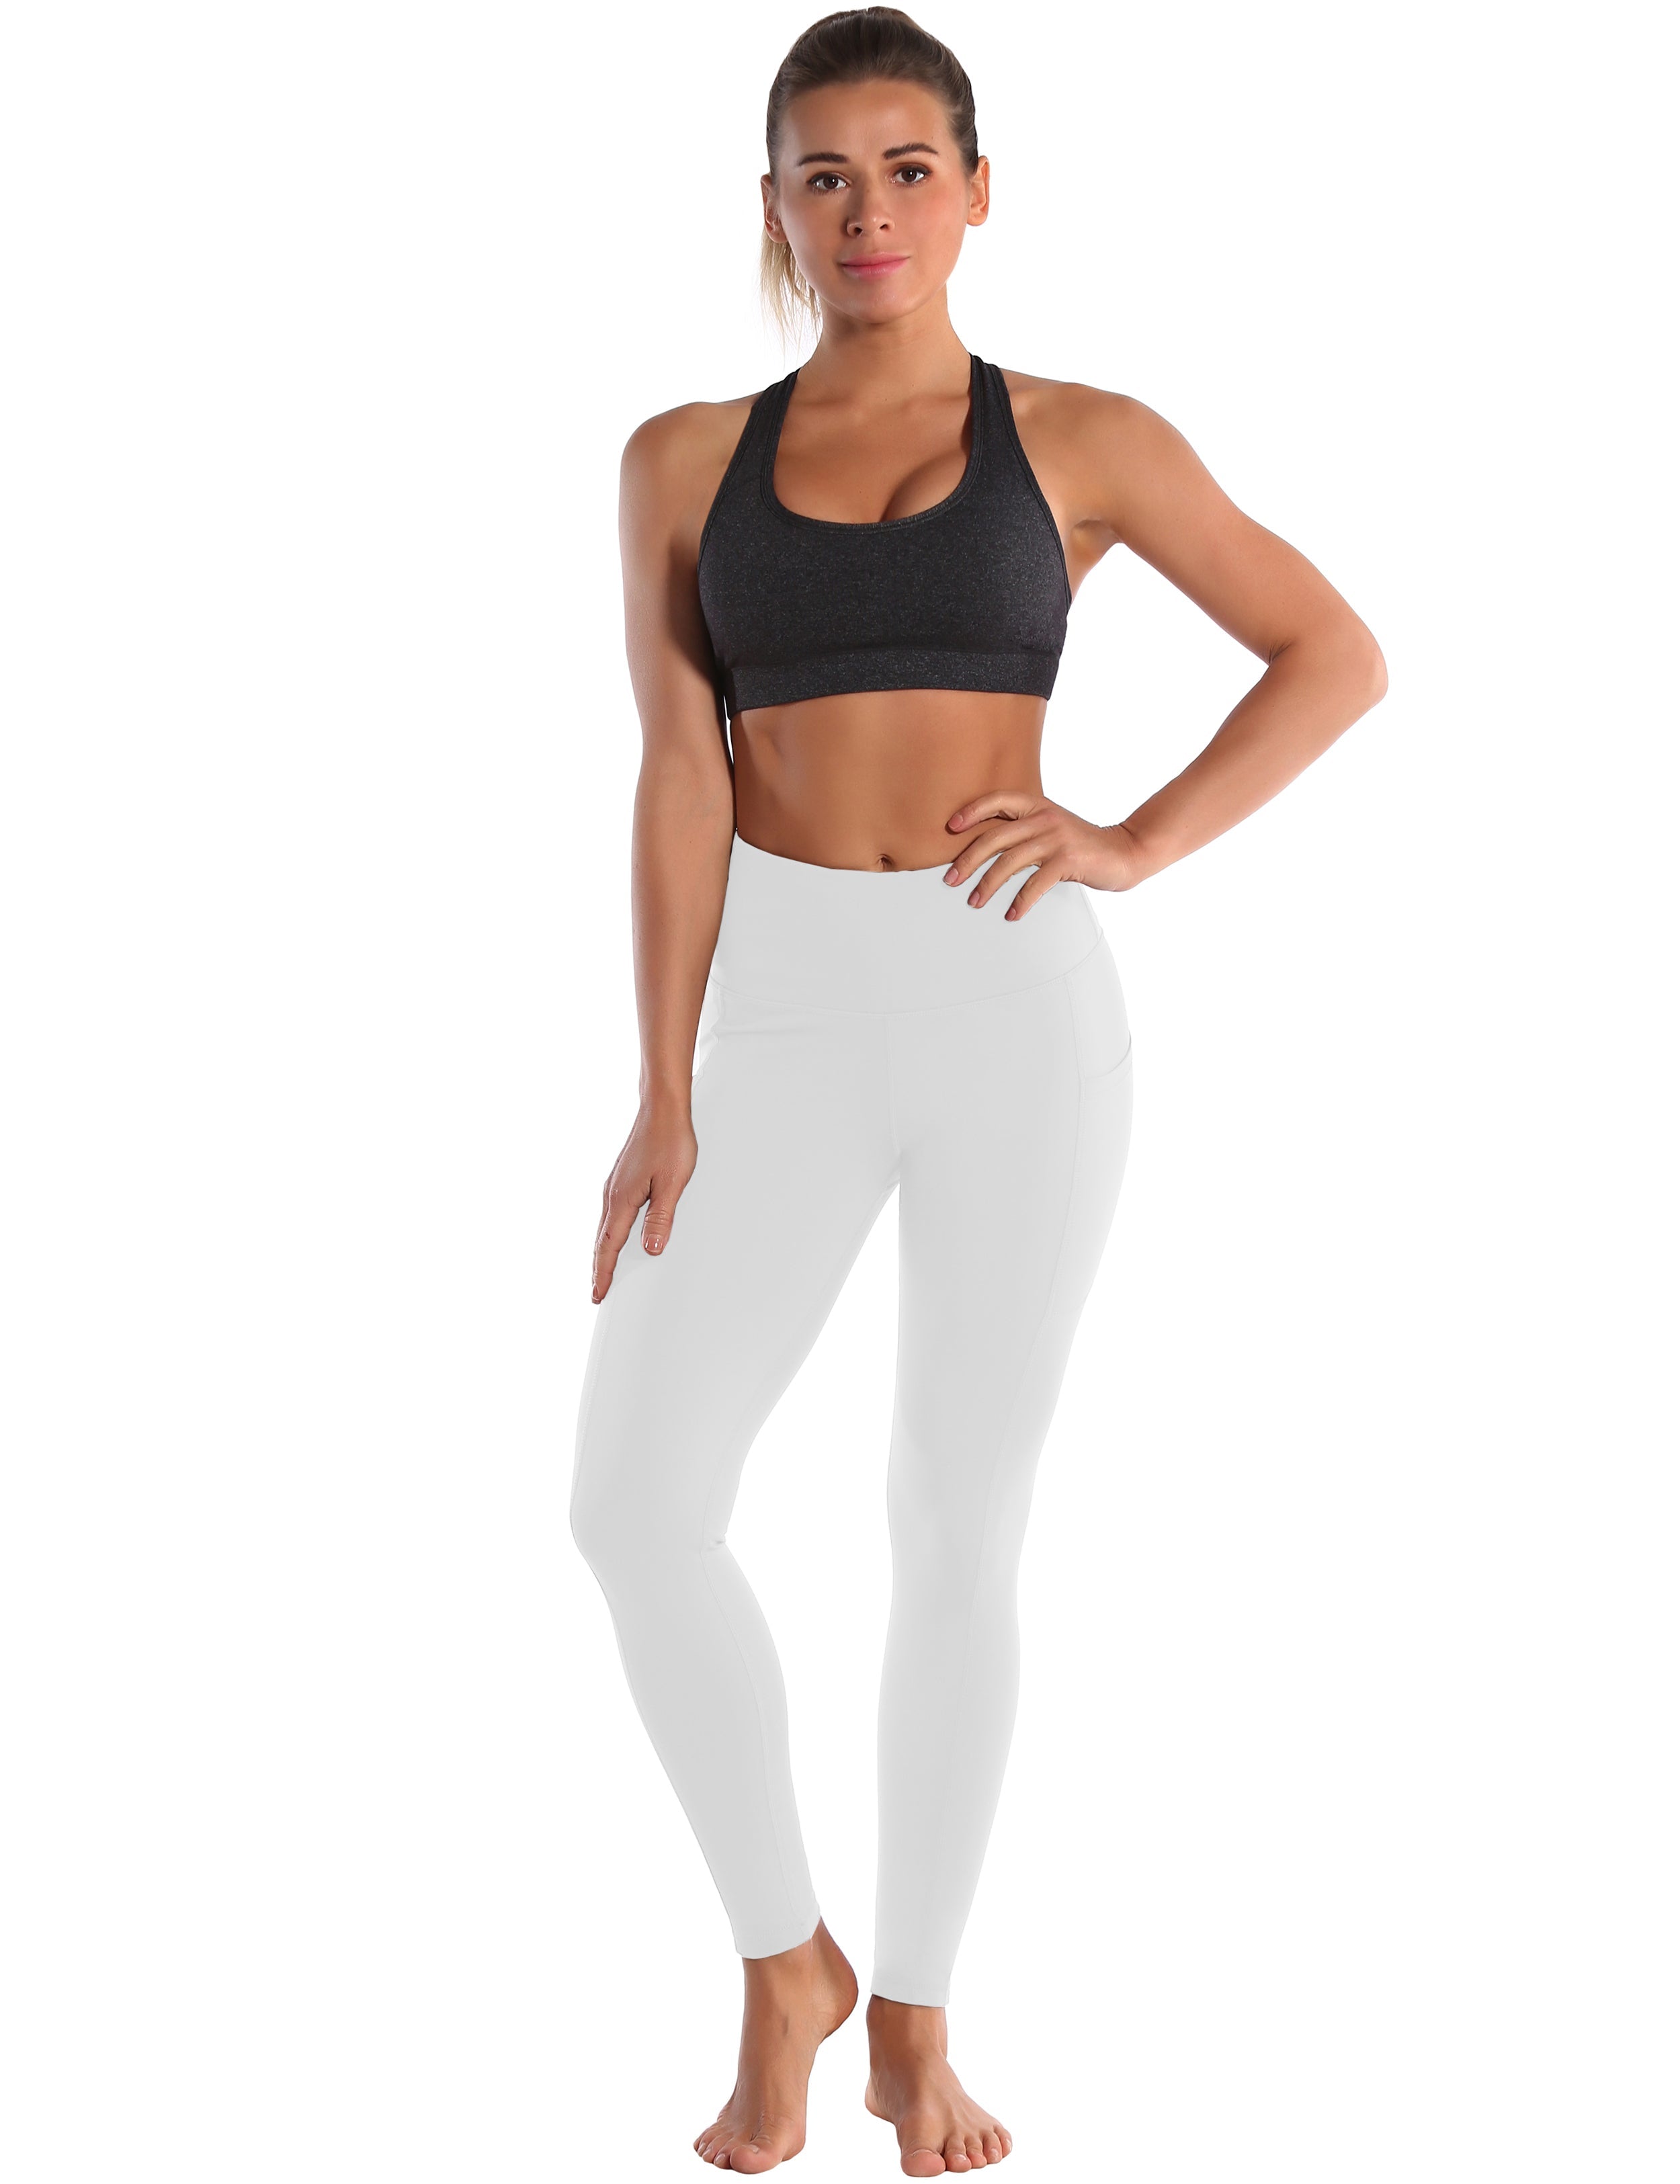 Hip Line Side Pockets Jogging Pants lightgray Sexy Hip Line Side Pockets 75%Nylon/25%Spandex Fabric doesn't attract lint easily 4-way stretch No see-through Moisture-wicking Tummy control Inner pocket Two lengths